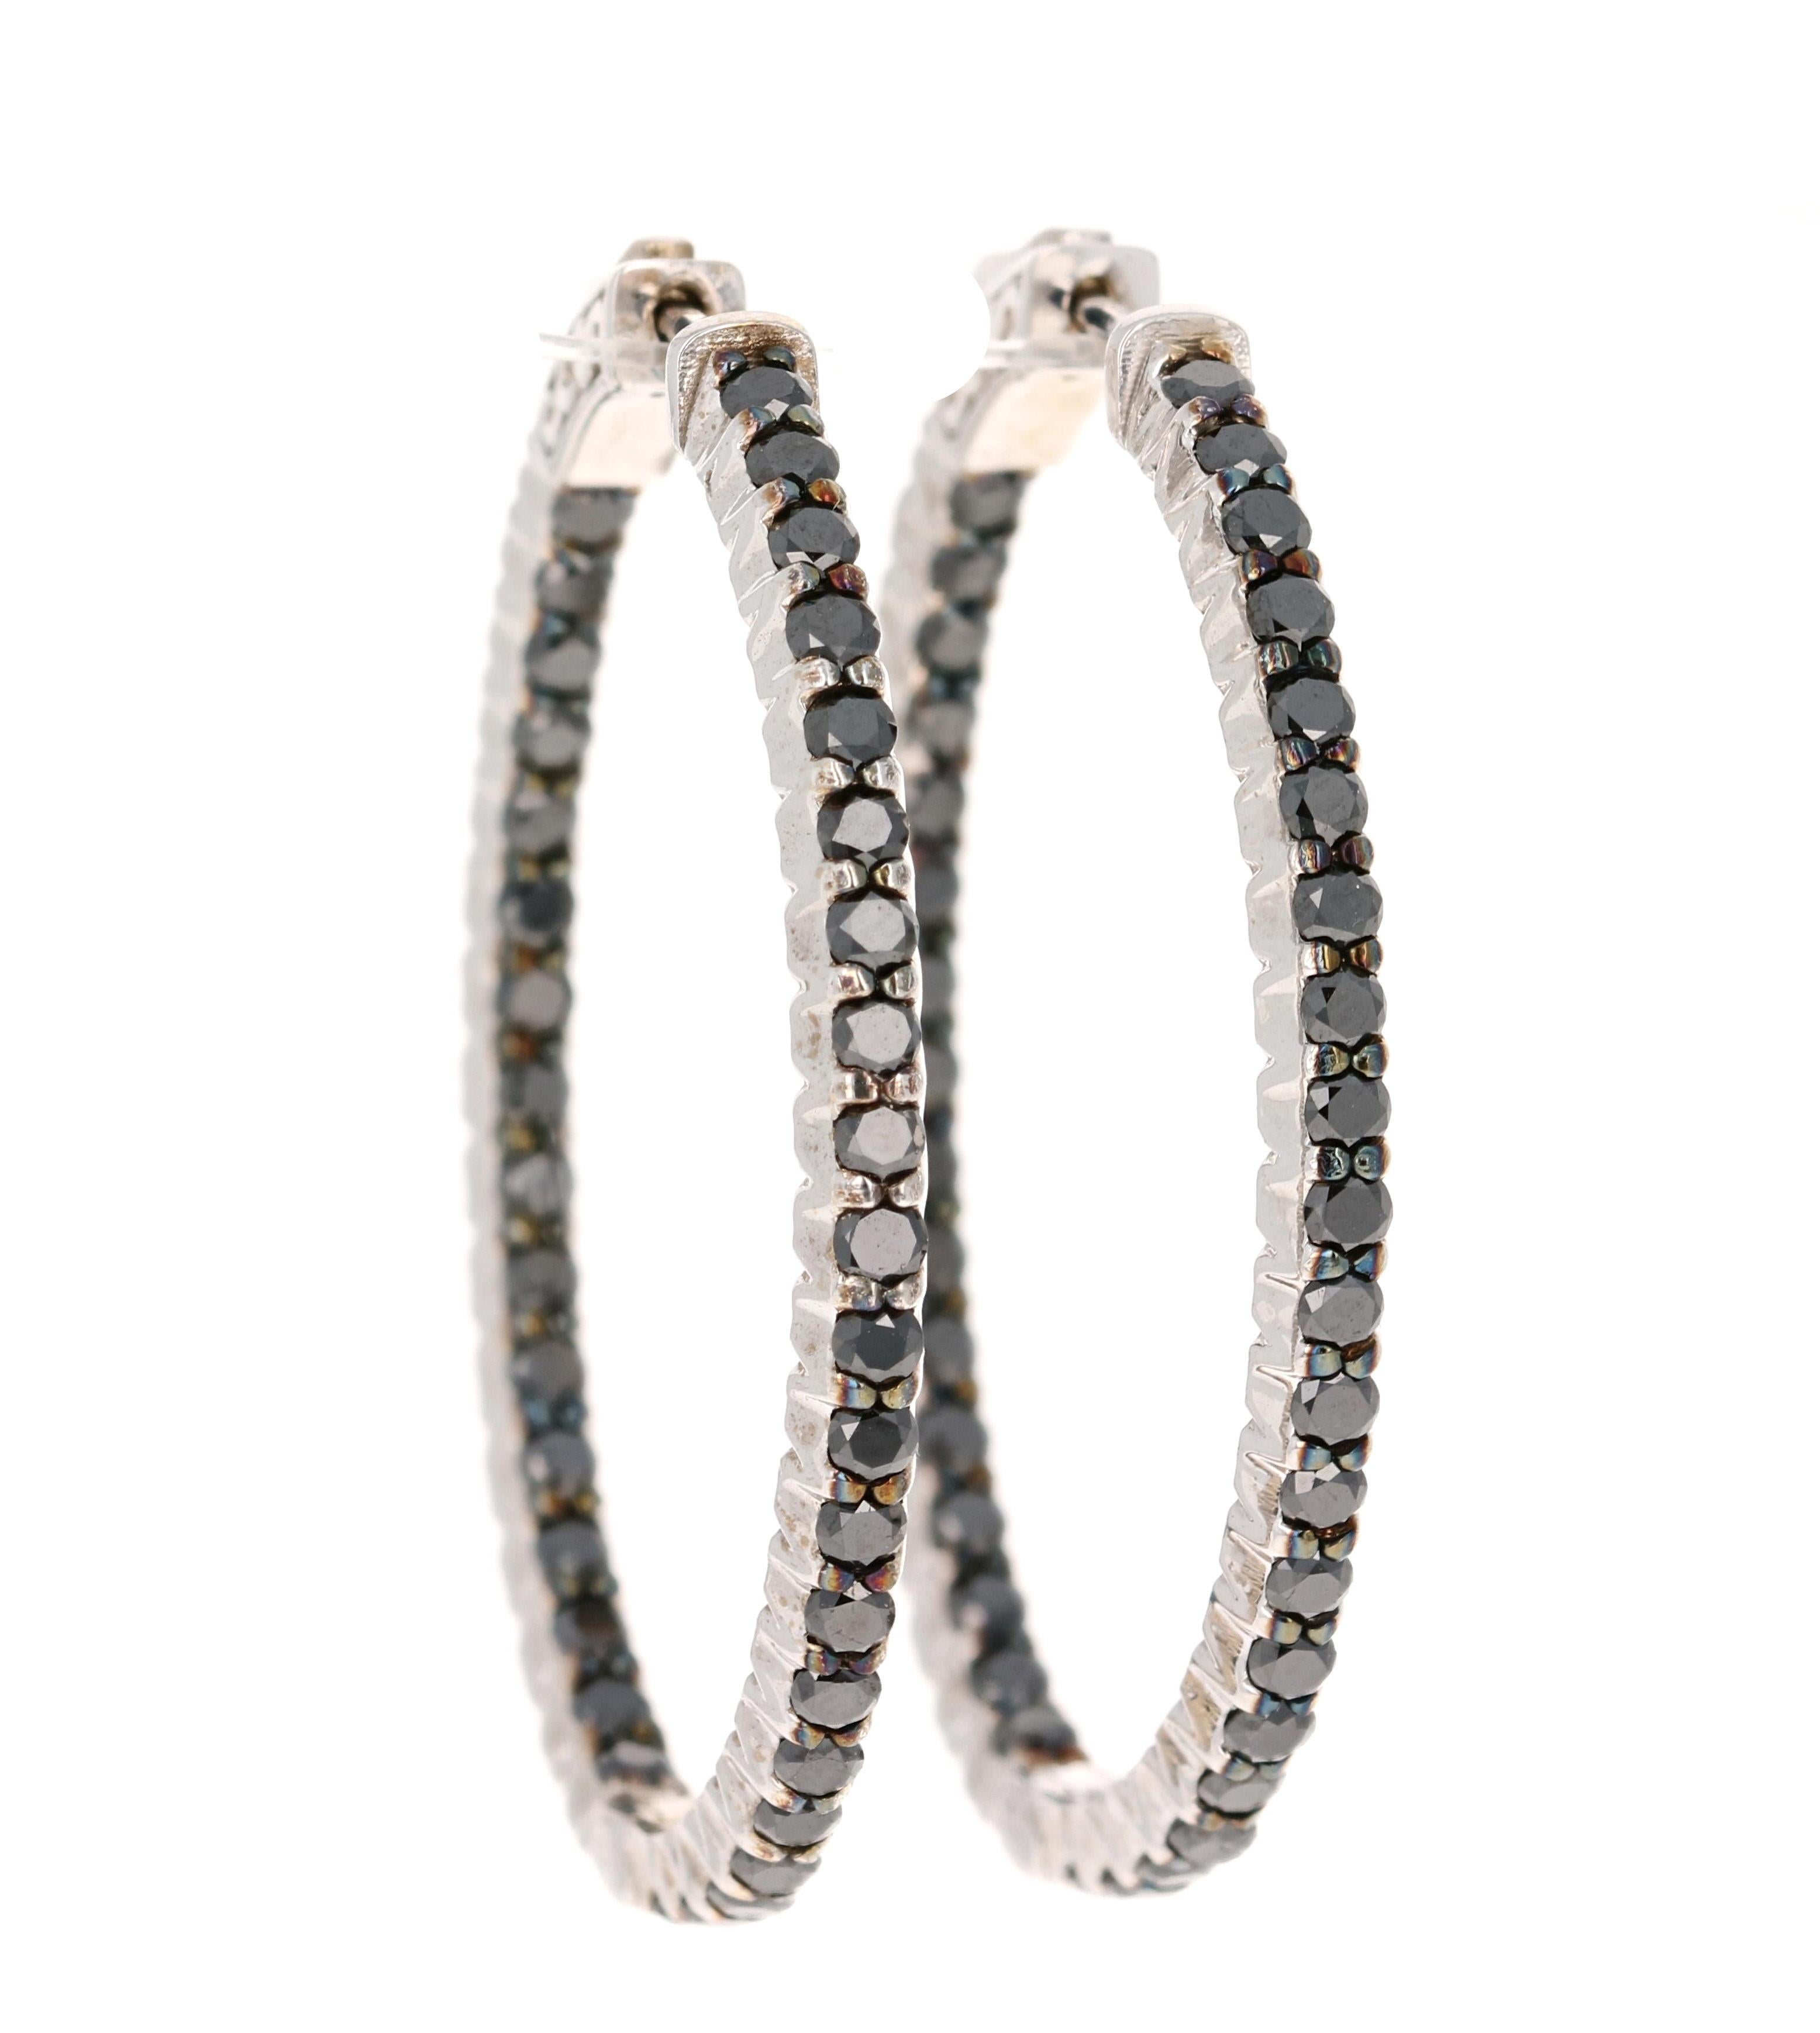 These hoop earrings have 74 Round Cut Black Diamonds that weigh 3.33 carats. 

They are set in 14 Karat White Gold and have an approximate gold weight of 11.1 grams.

The hoops are 1.25 inches wide and 1.5 inches long. 